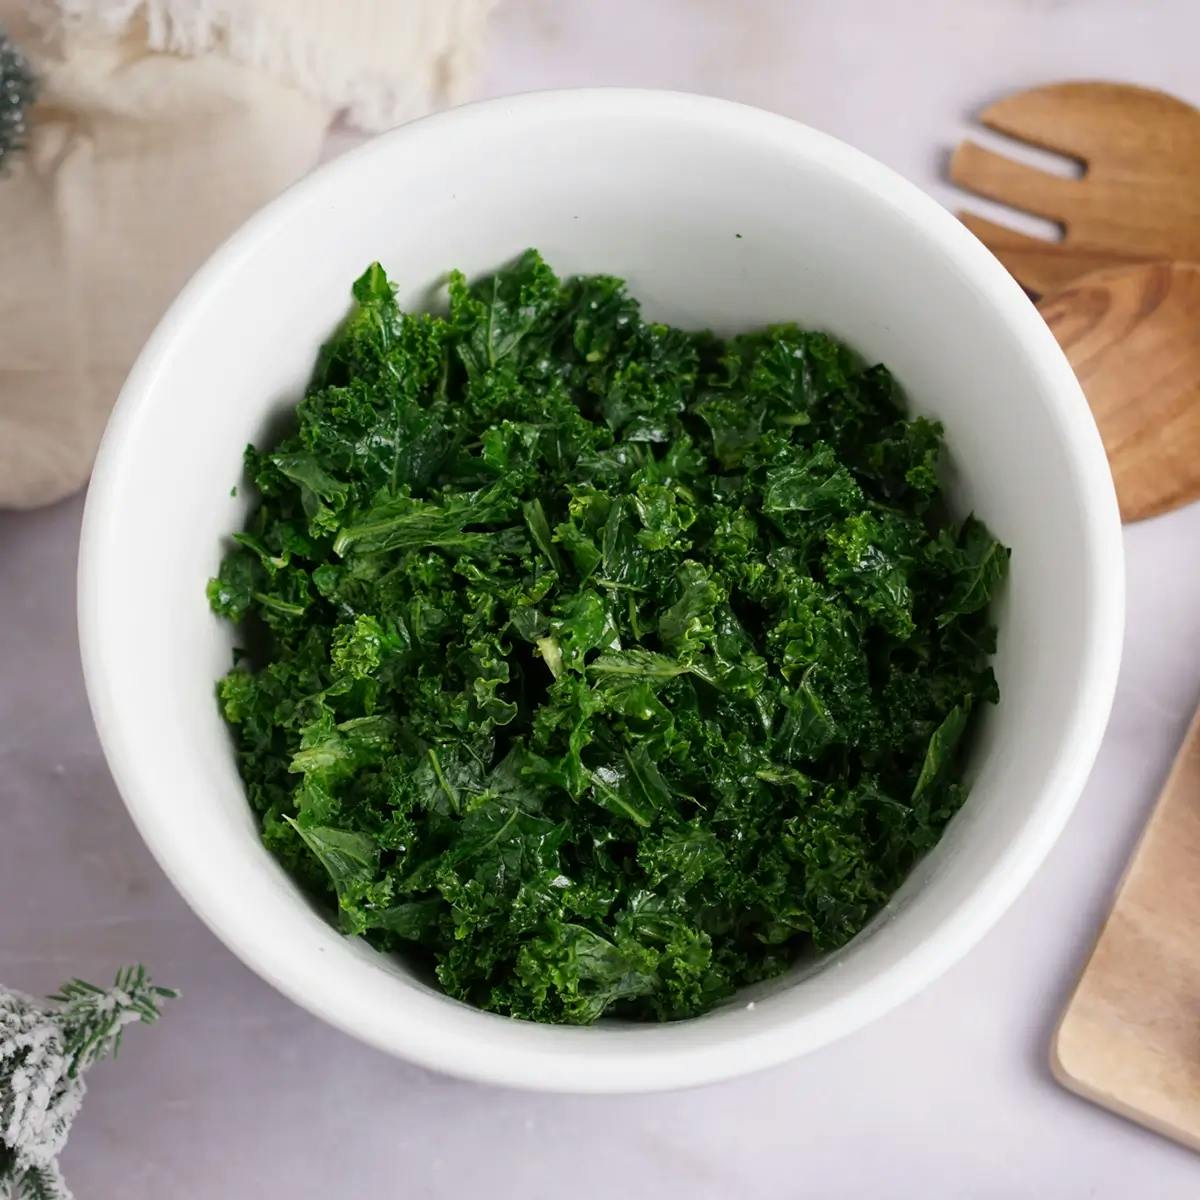 Massaging kale until soft, as part of a Thanksgiving salad recipe.